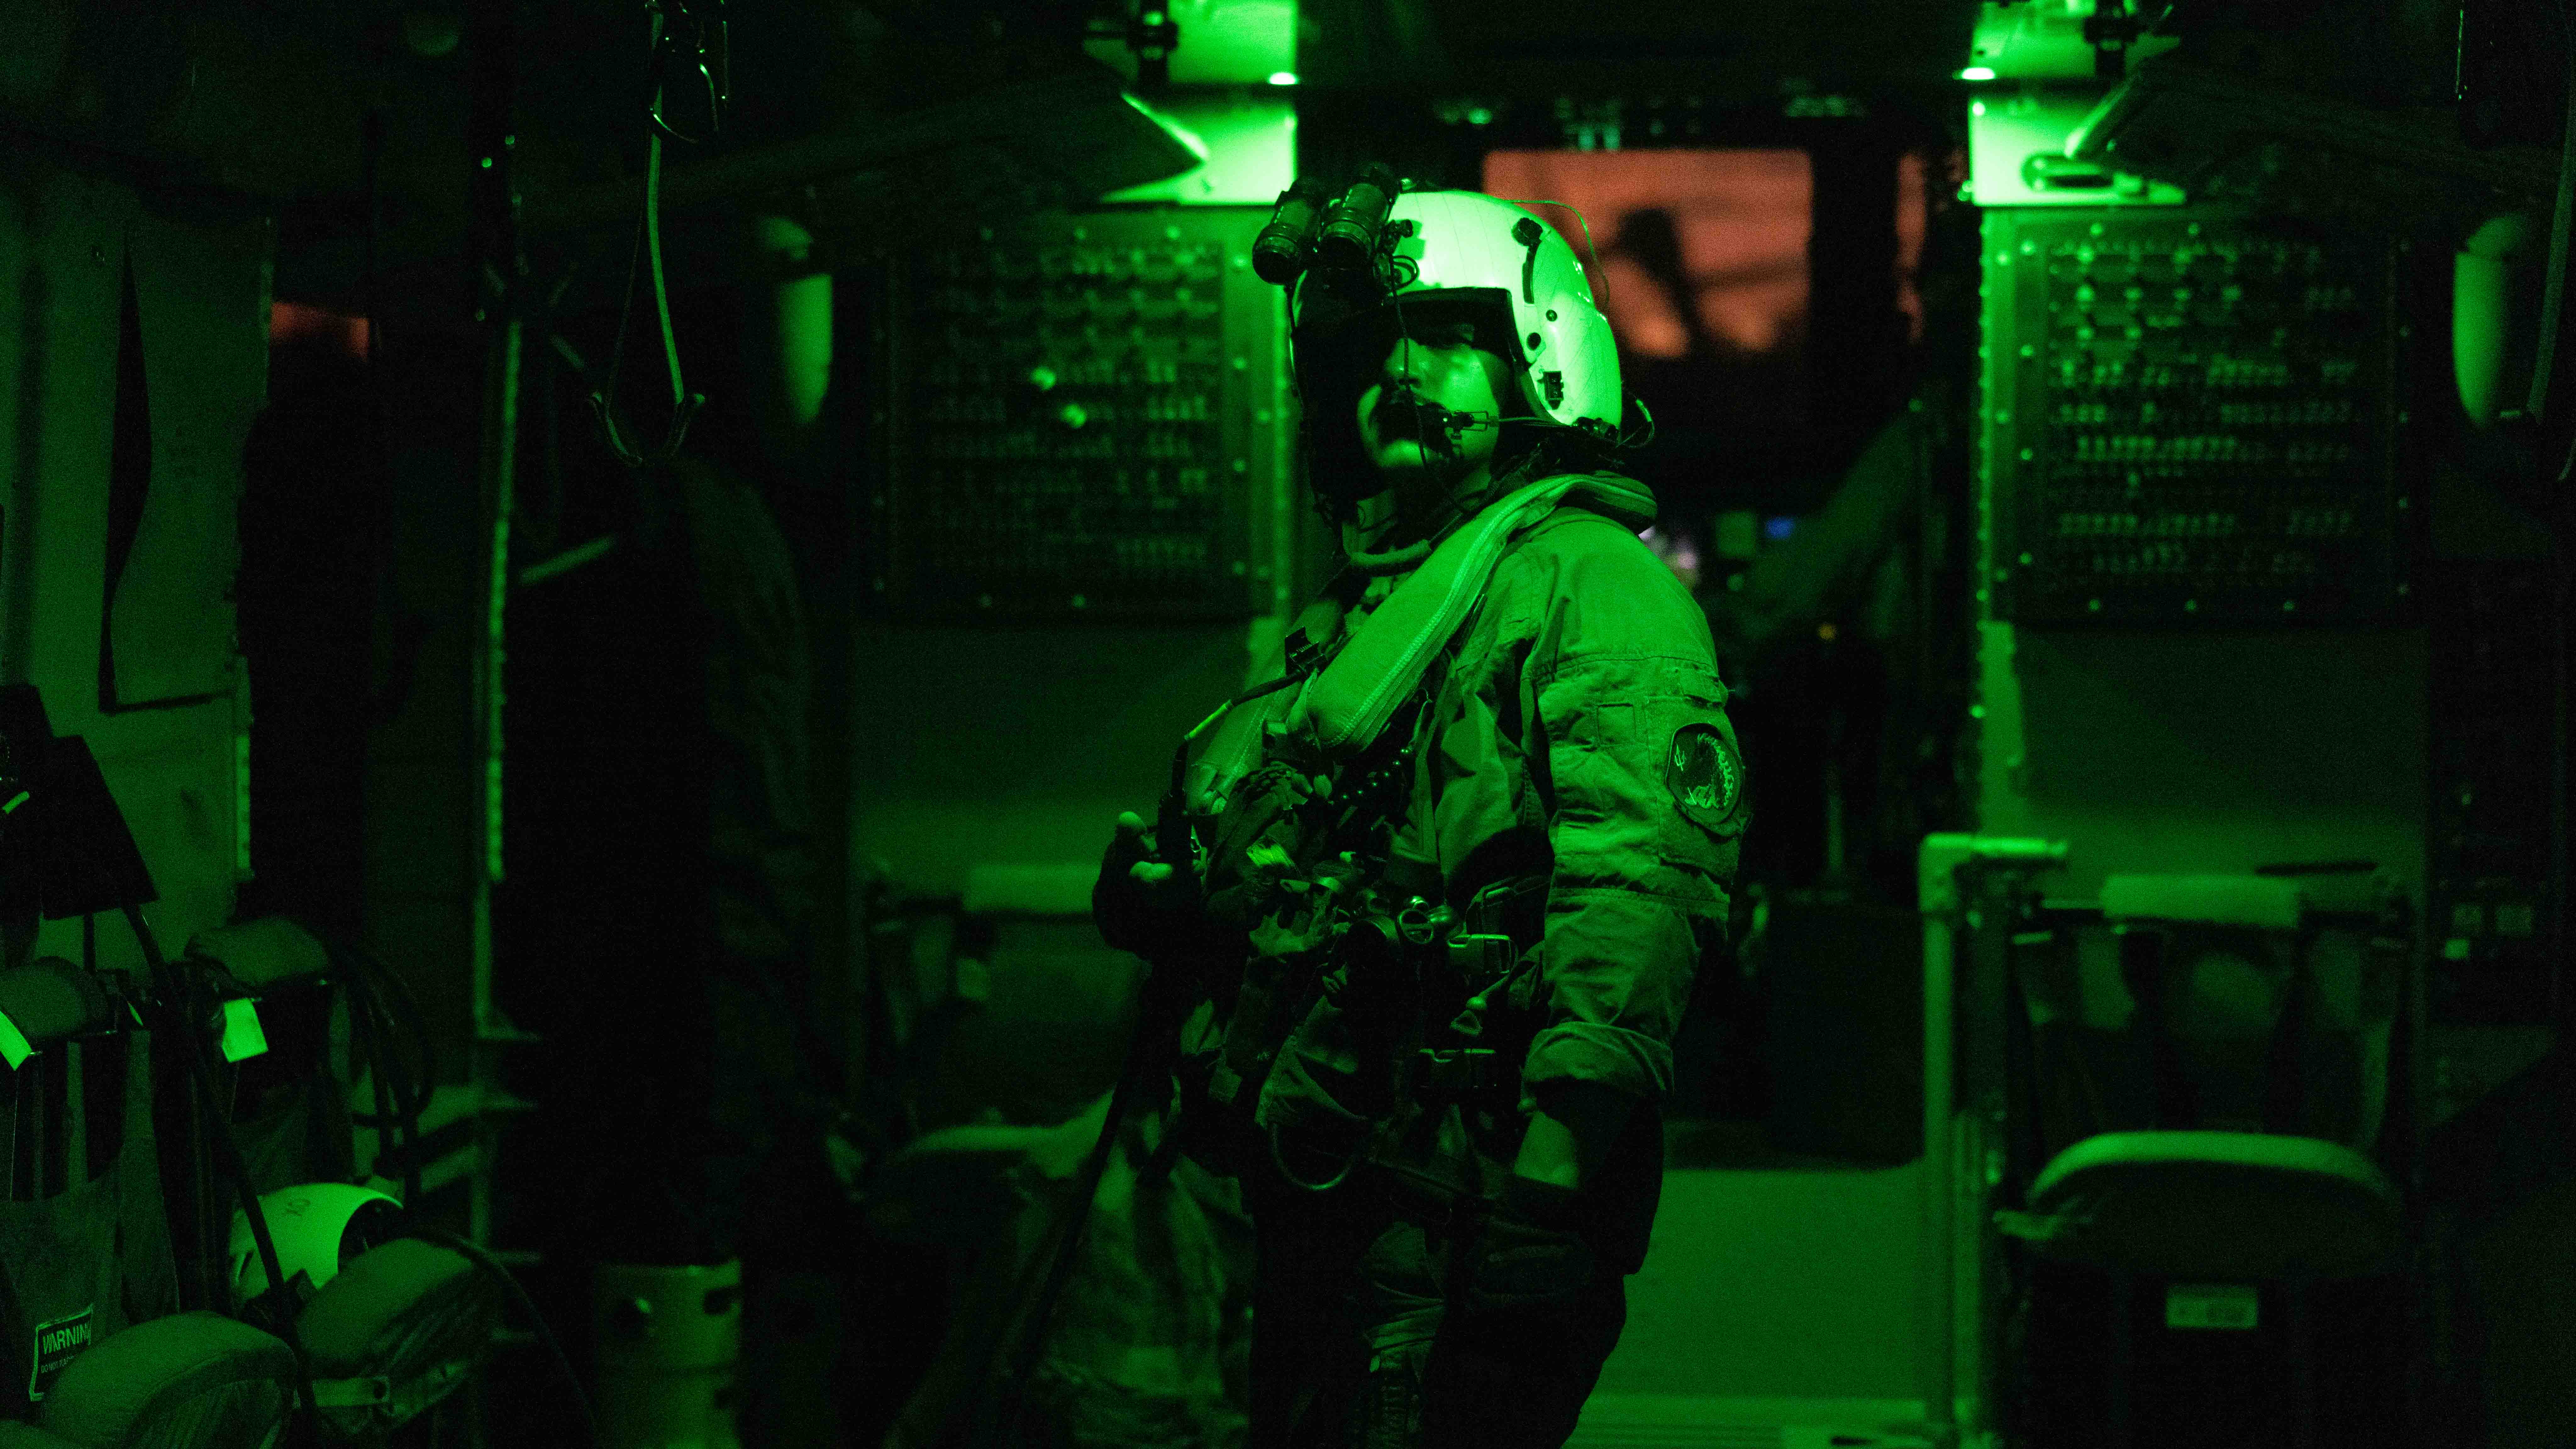 U.S. Marine Corps Cpl. Cesar Durangordian, a helicopter mechanic with Marine Heavy Helicopter Squadron (HMH) 461, observes the back of a CH-53K King Stallion at Marine Corps Outlying Field Oak Grove, North Carolina, Aug. 14, 2023. HMH-461 takes part in Large Scale Exercise 2023, a globally integrated exercise designed to refine how we synchronize maritime operations across multiple fleets, in support of the joint force. The training is based on a progression of scenarios that will assess and refine how modern warfare concepts. HMH-461 is a subordinate unit of 2nd Marine Aircraft Wing, the aviation combat element of II Marine Expeditionary Force. (U.S. Marine Corps photo by Lance Cpl. Orlanys Diaz Figueroa)